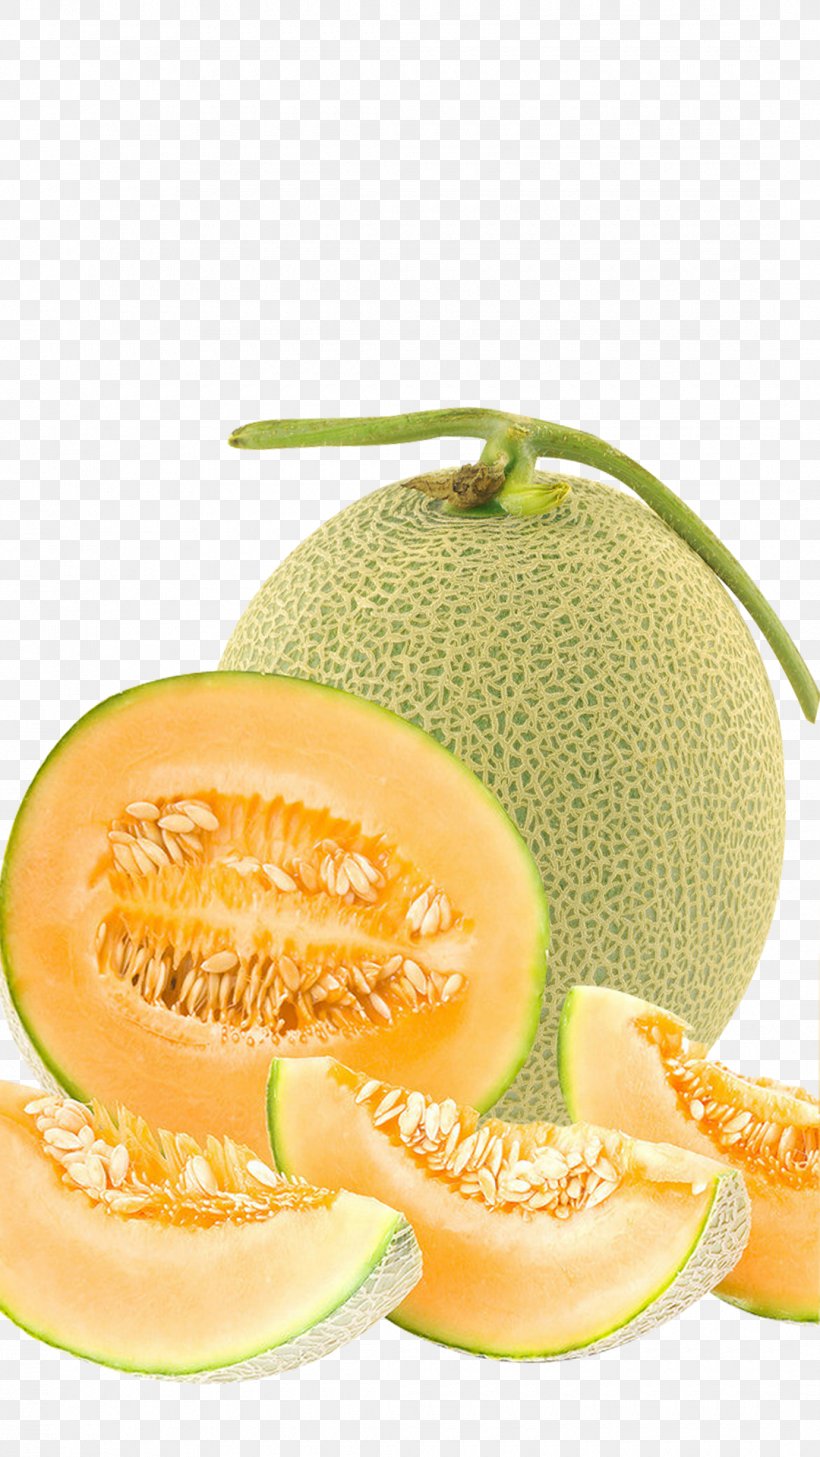 Juice Cantaloupe Frutti Di Bosco Fruit Watermelon, PNG, 1080x1920px, Juice, Cantaloupe, Cucumber Gourd And Melon Family, Diet Food, Flavor Download Free